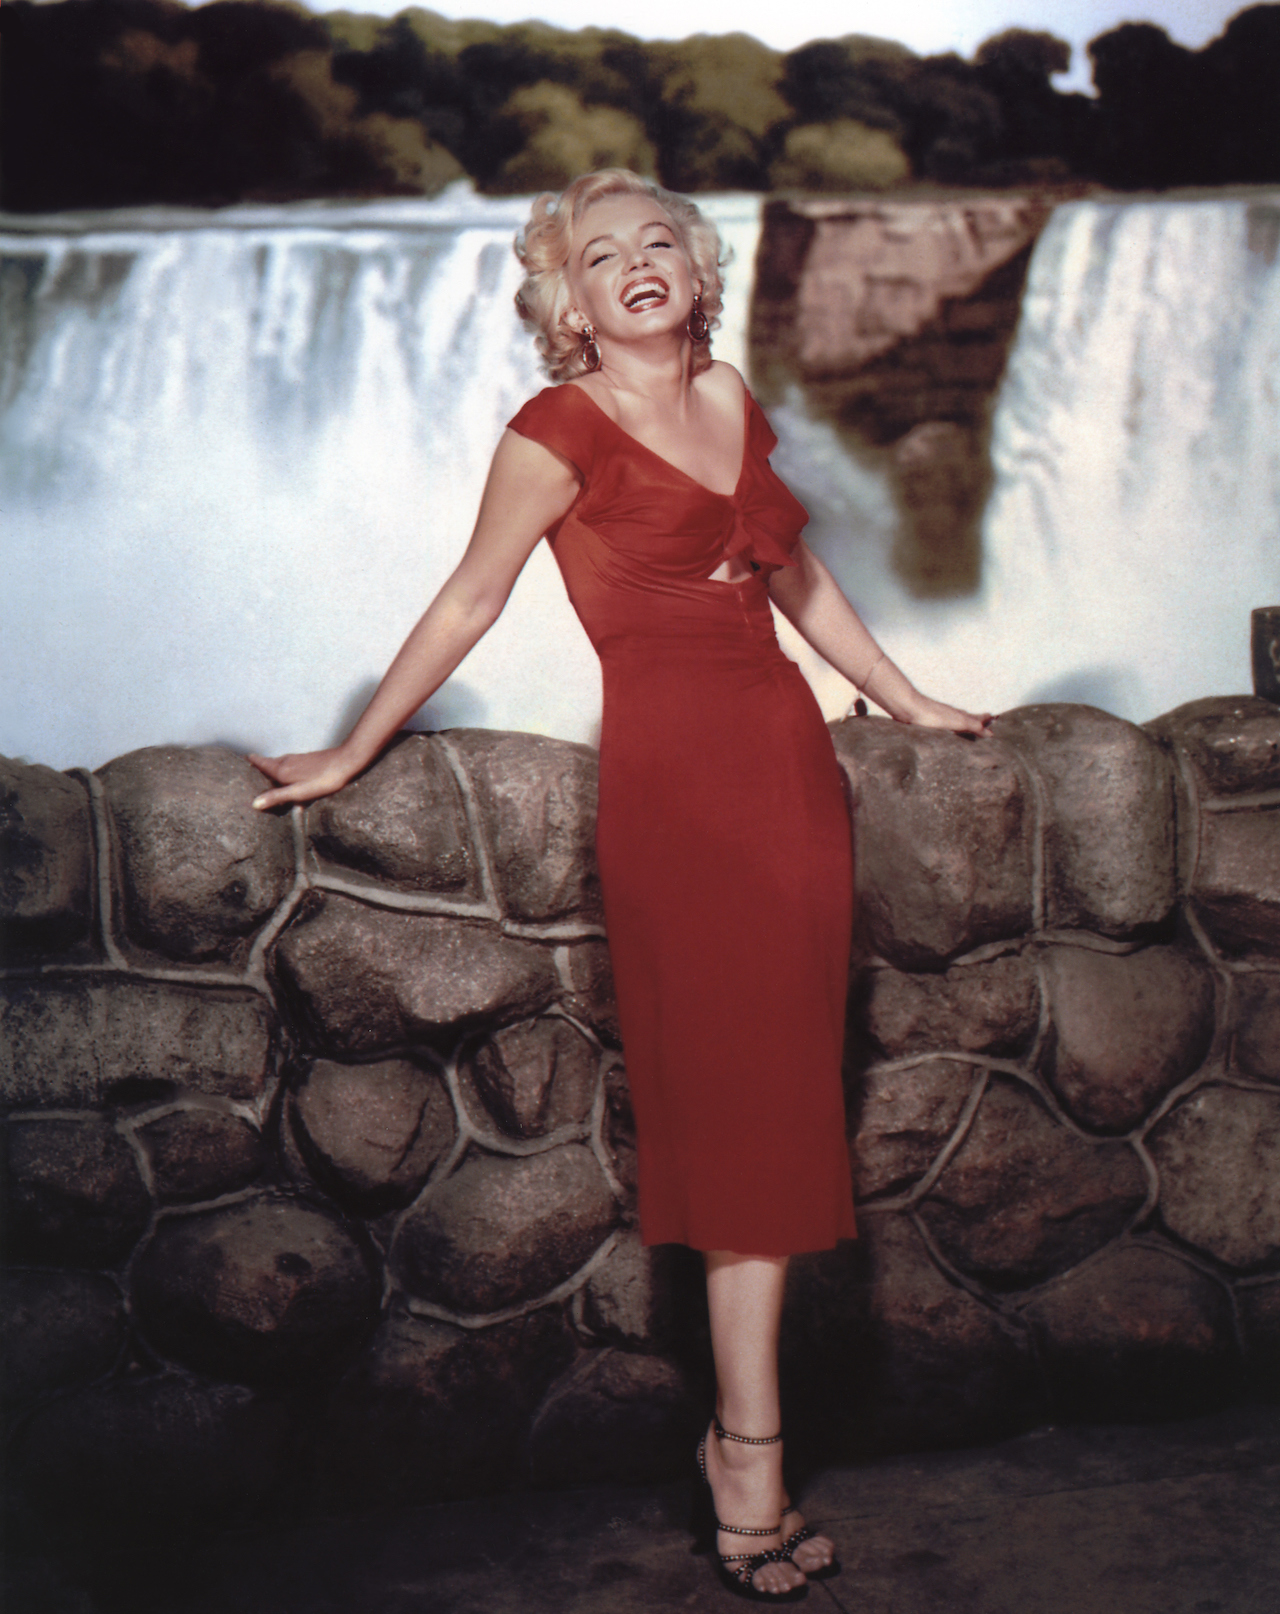 Marilyn Monroe's Best Fashion Moments of All Time